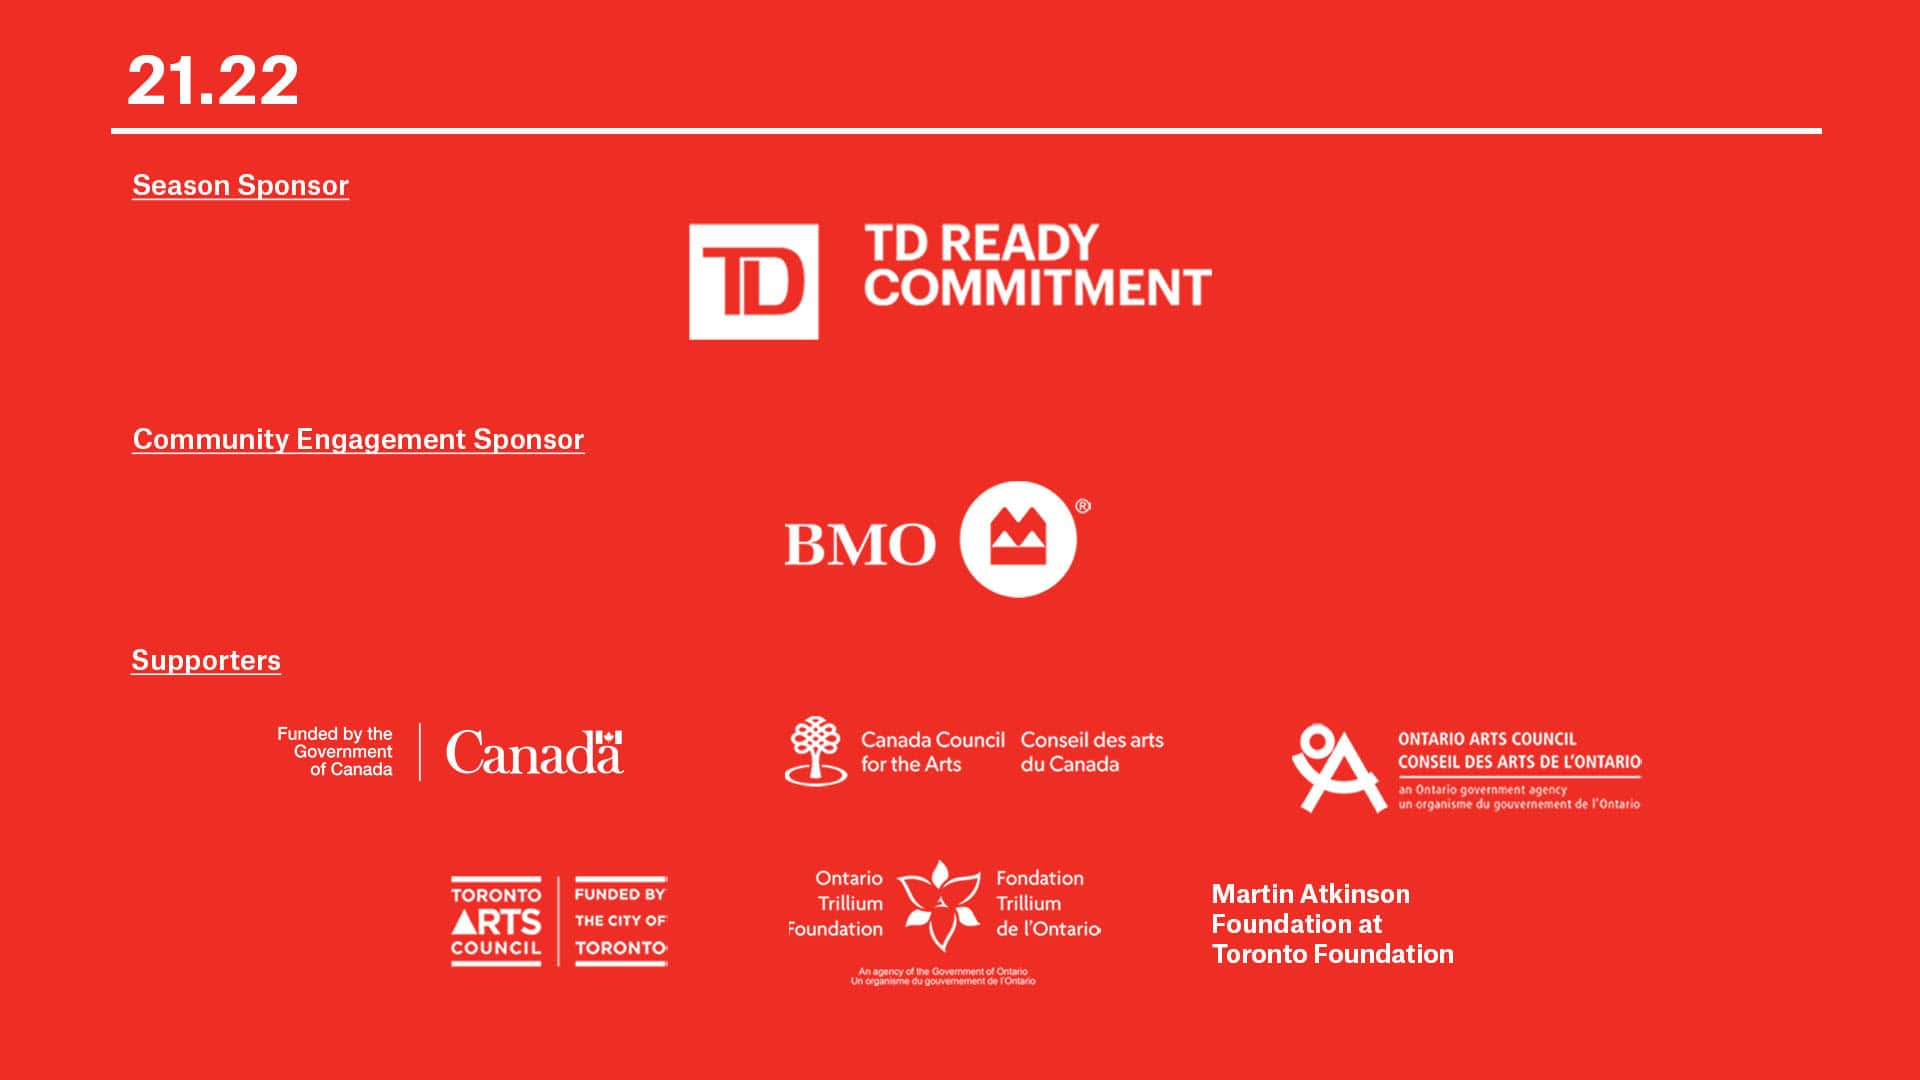 TPM's 21.22 year is sponsored by TD, TD Ready Commitment, BMO and supported by the government of Canada, Canada Council for the arts, Ontario arts council, Toronto arts council, Ontario trillium foundation and the Martin Atkinson foundation at Toronto foundation.